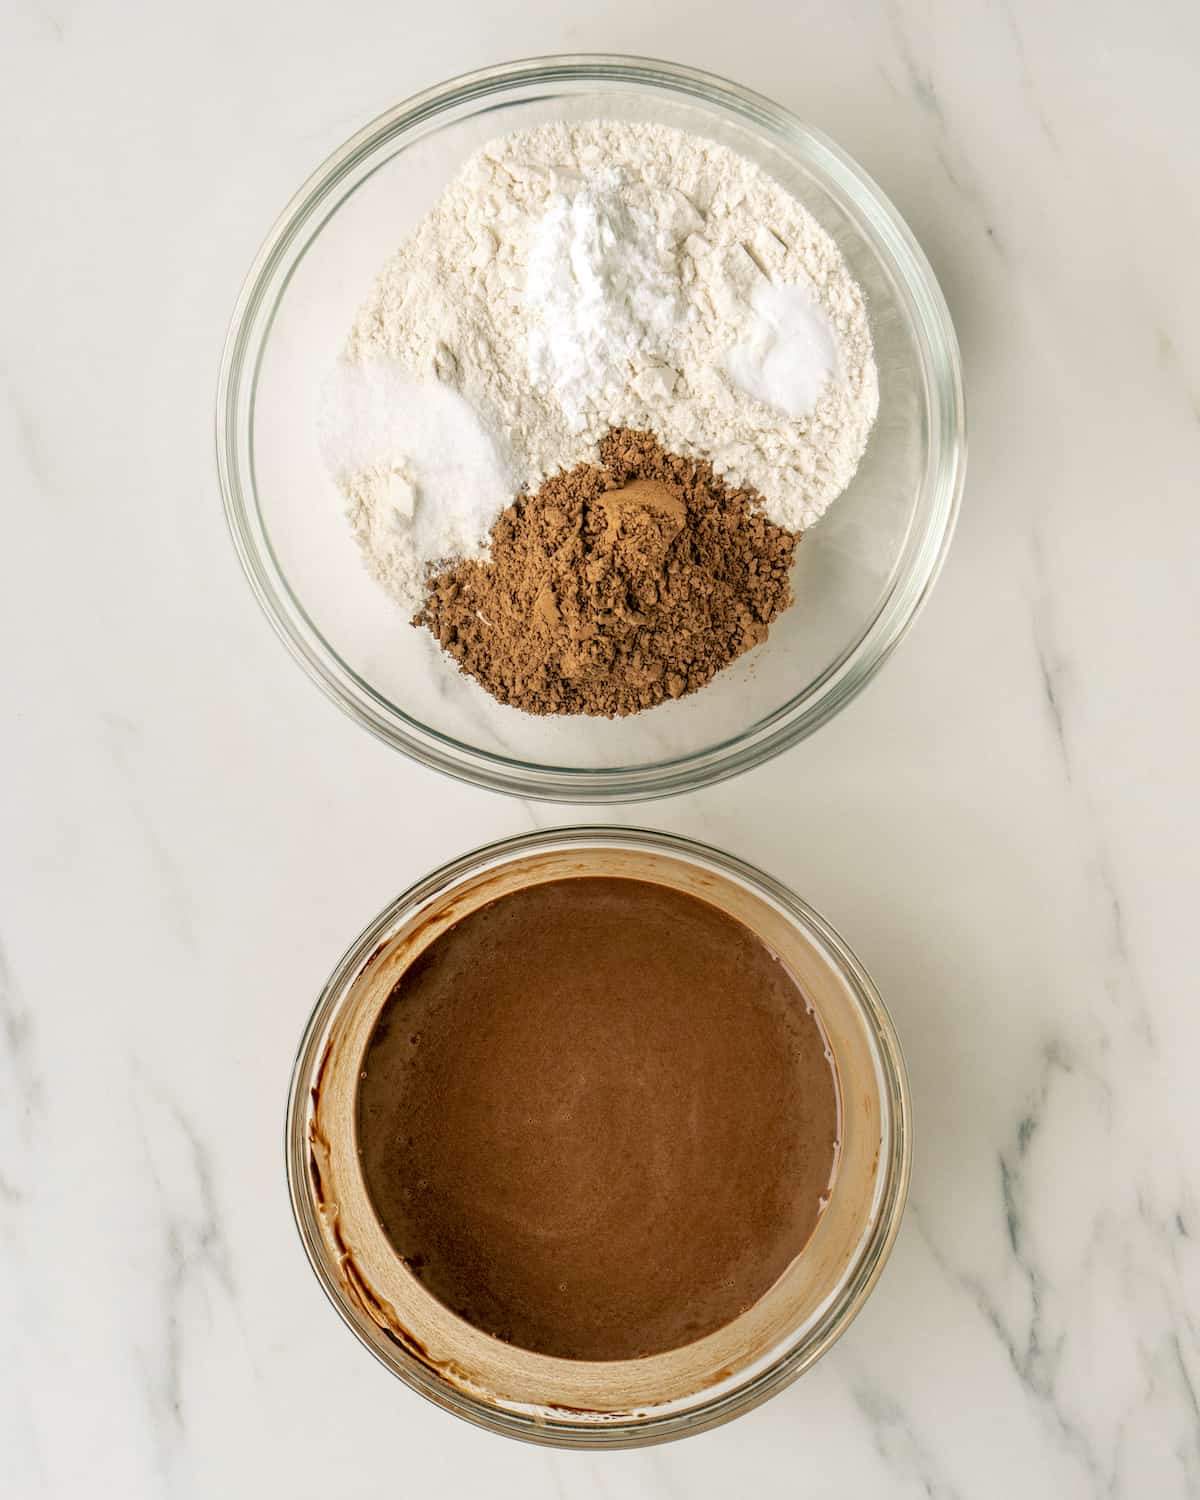 Two glass mixing bowls, one with dry ingredients: flour, cocoa powder, baking powder, baking soda and salt; and one with remaining cocoa powder and water whisked together.